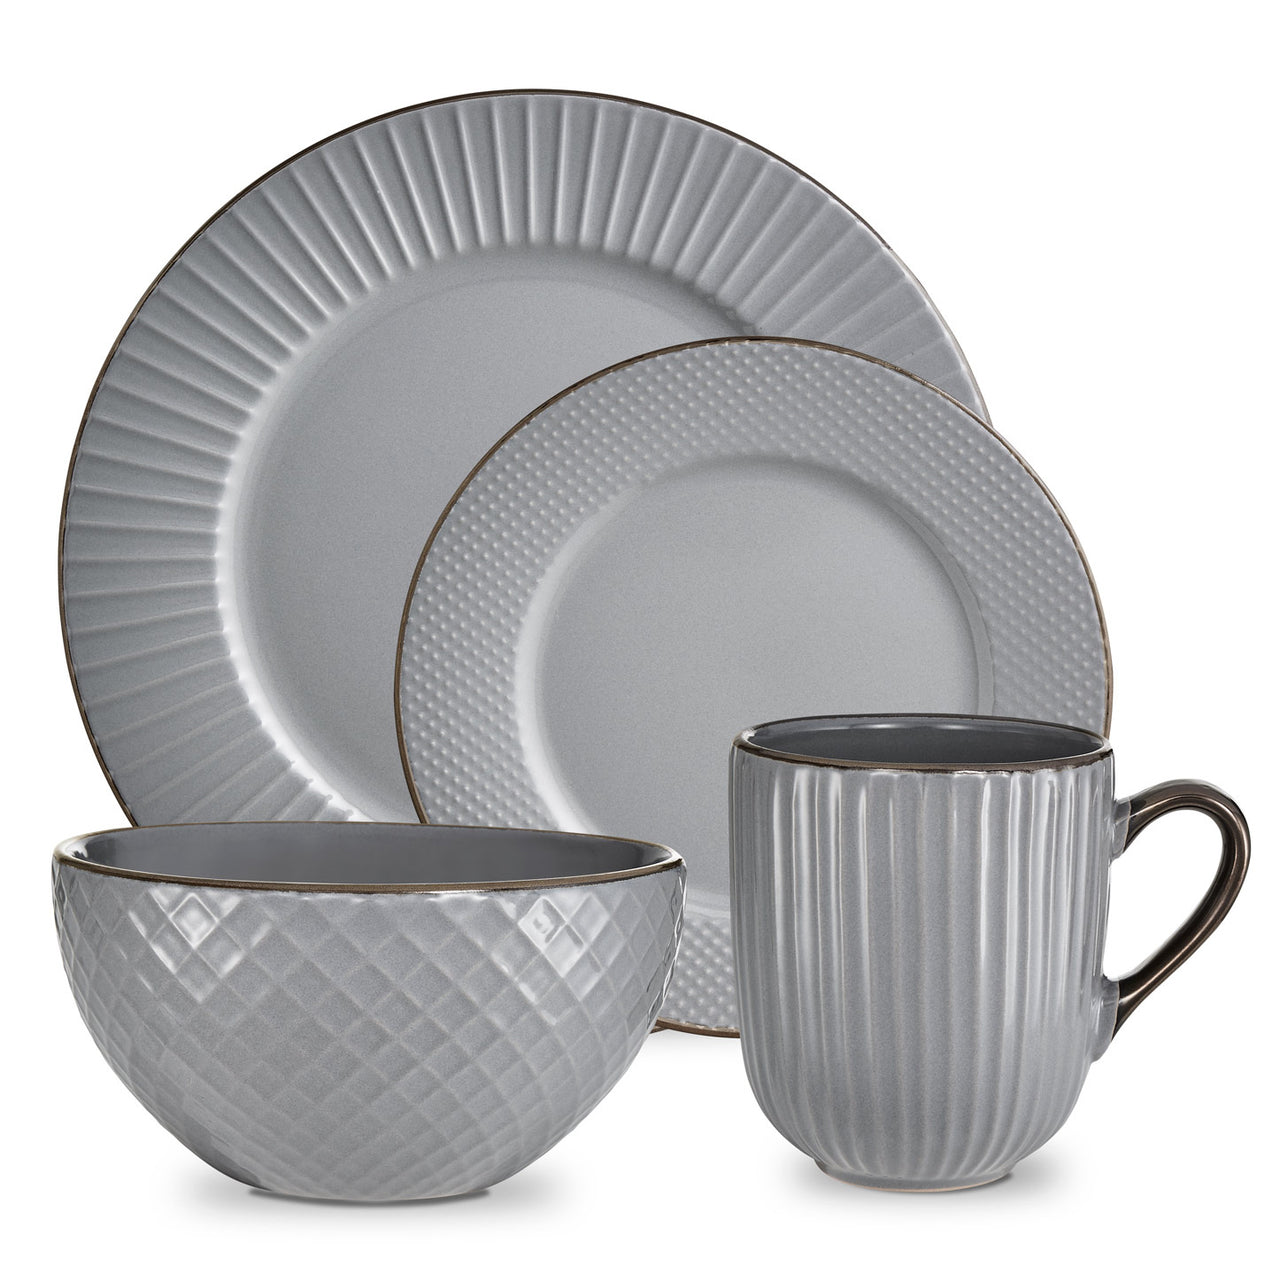 Tower Empire 16 Piece Dinner Set in Grey with Burnt Gold Accents Dining Set